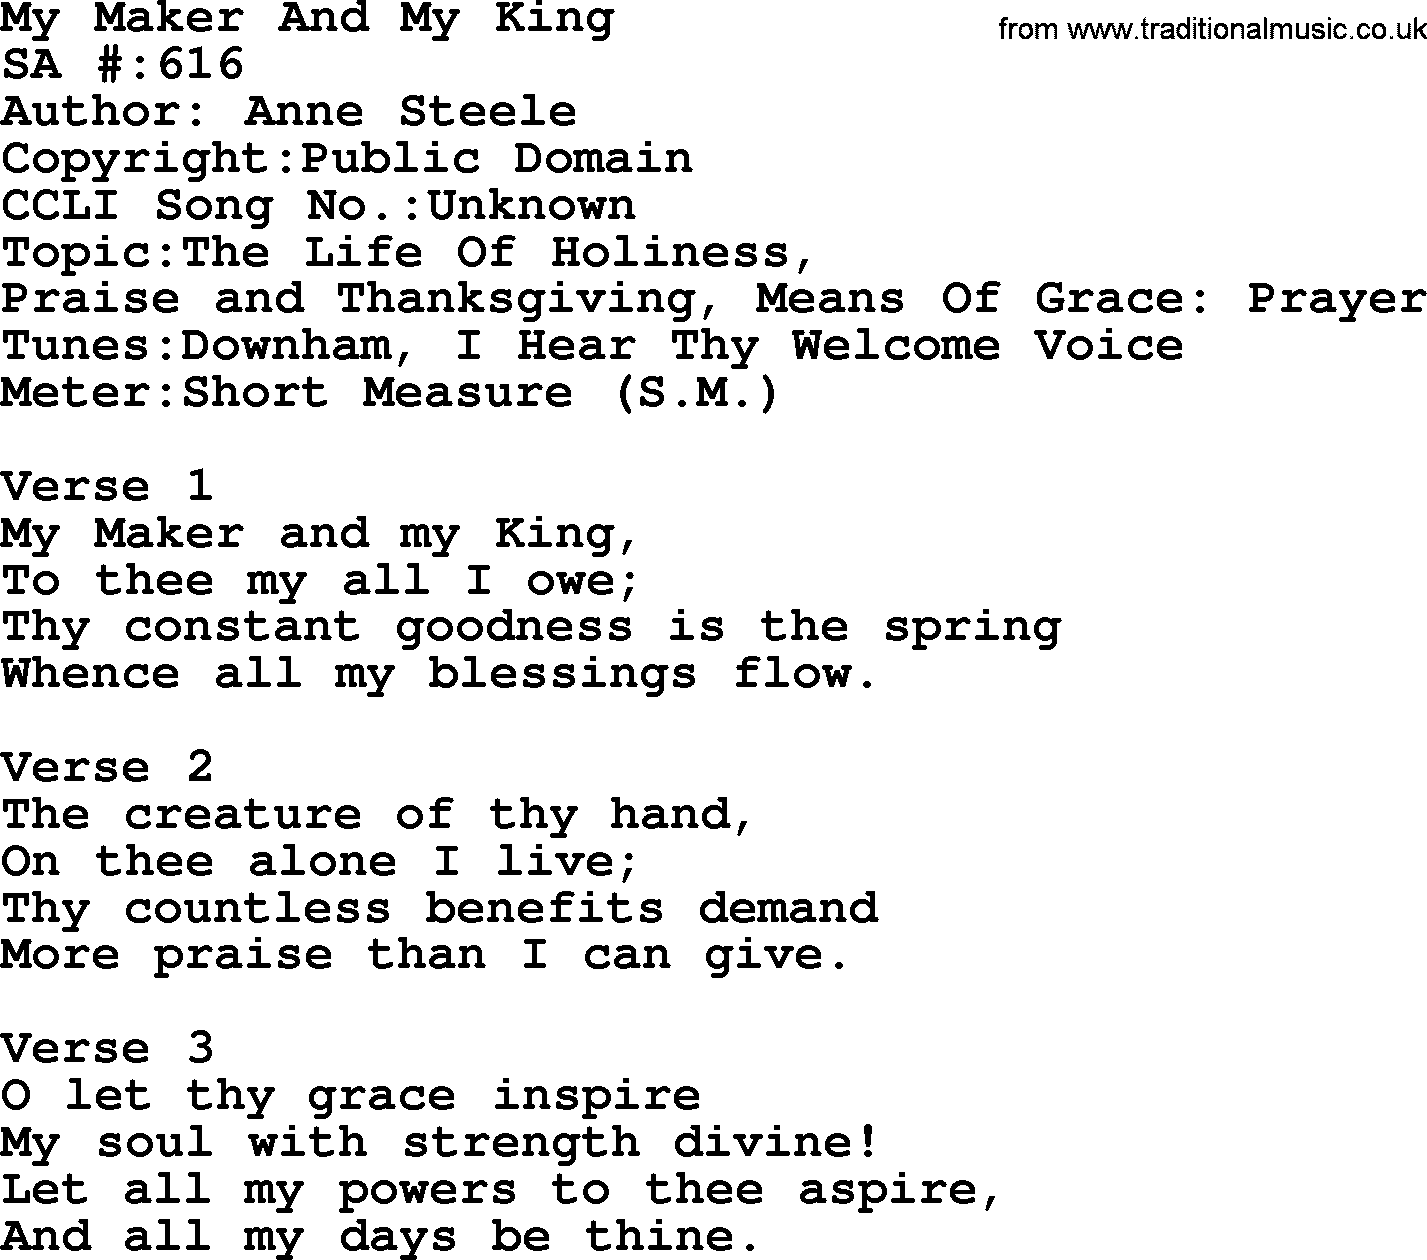 Salvation Army Hymnal, title: My Maker And My King, with lyrics and PDF,